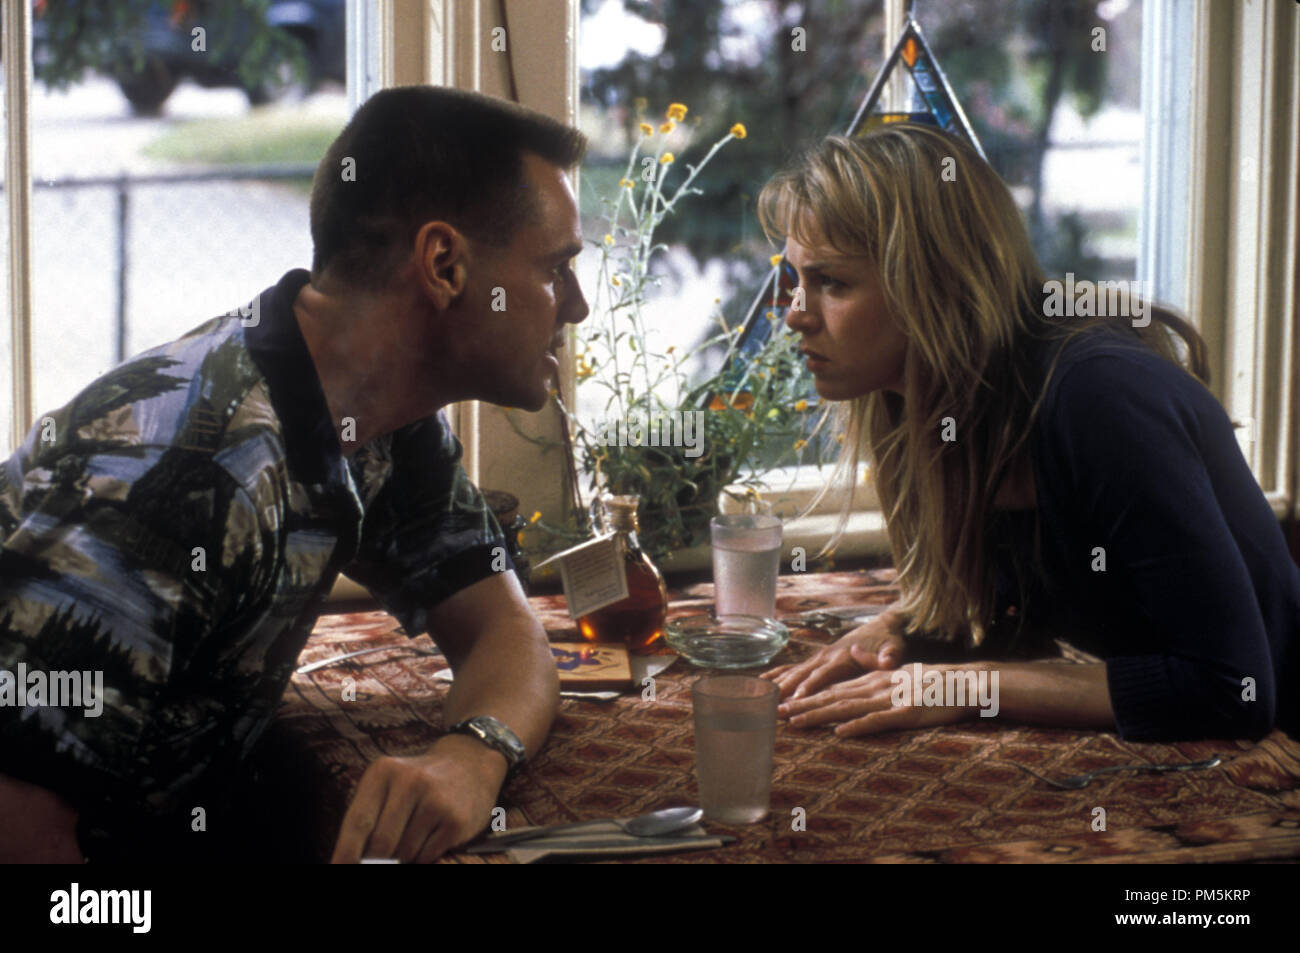 Film Still / Publicity Stills from 'Me, Myself and Irene' Jim Carrey, Renee Zellweger © 2000 20th Century Fox Photo Credit: Glenn Watson File Reference # 30846373THA  For Editorial Use Only -  All Rights Reserved Stock Photo